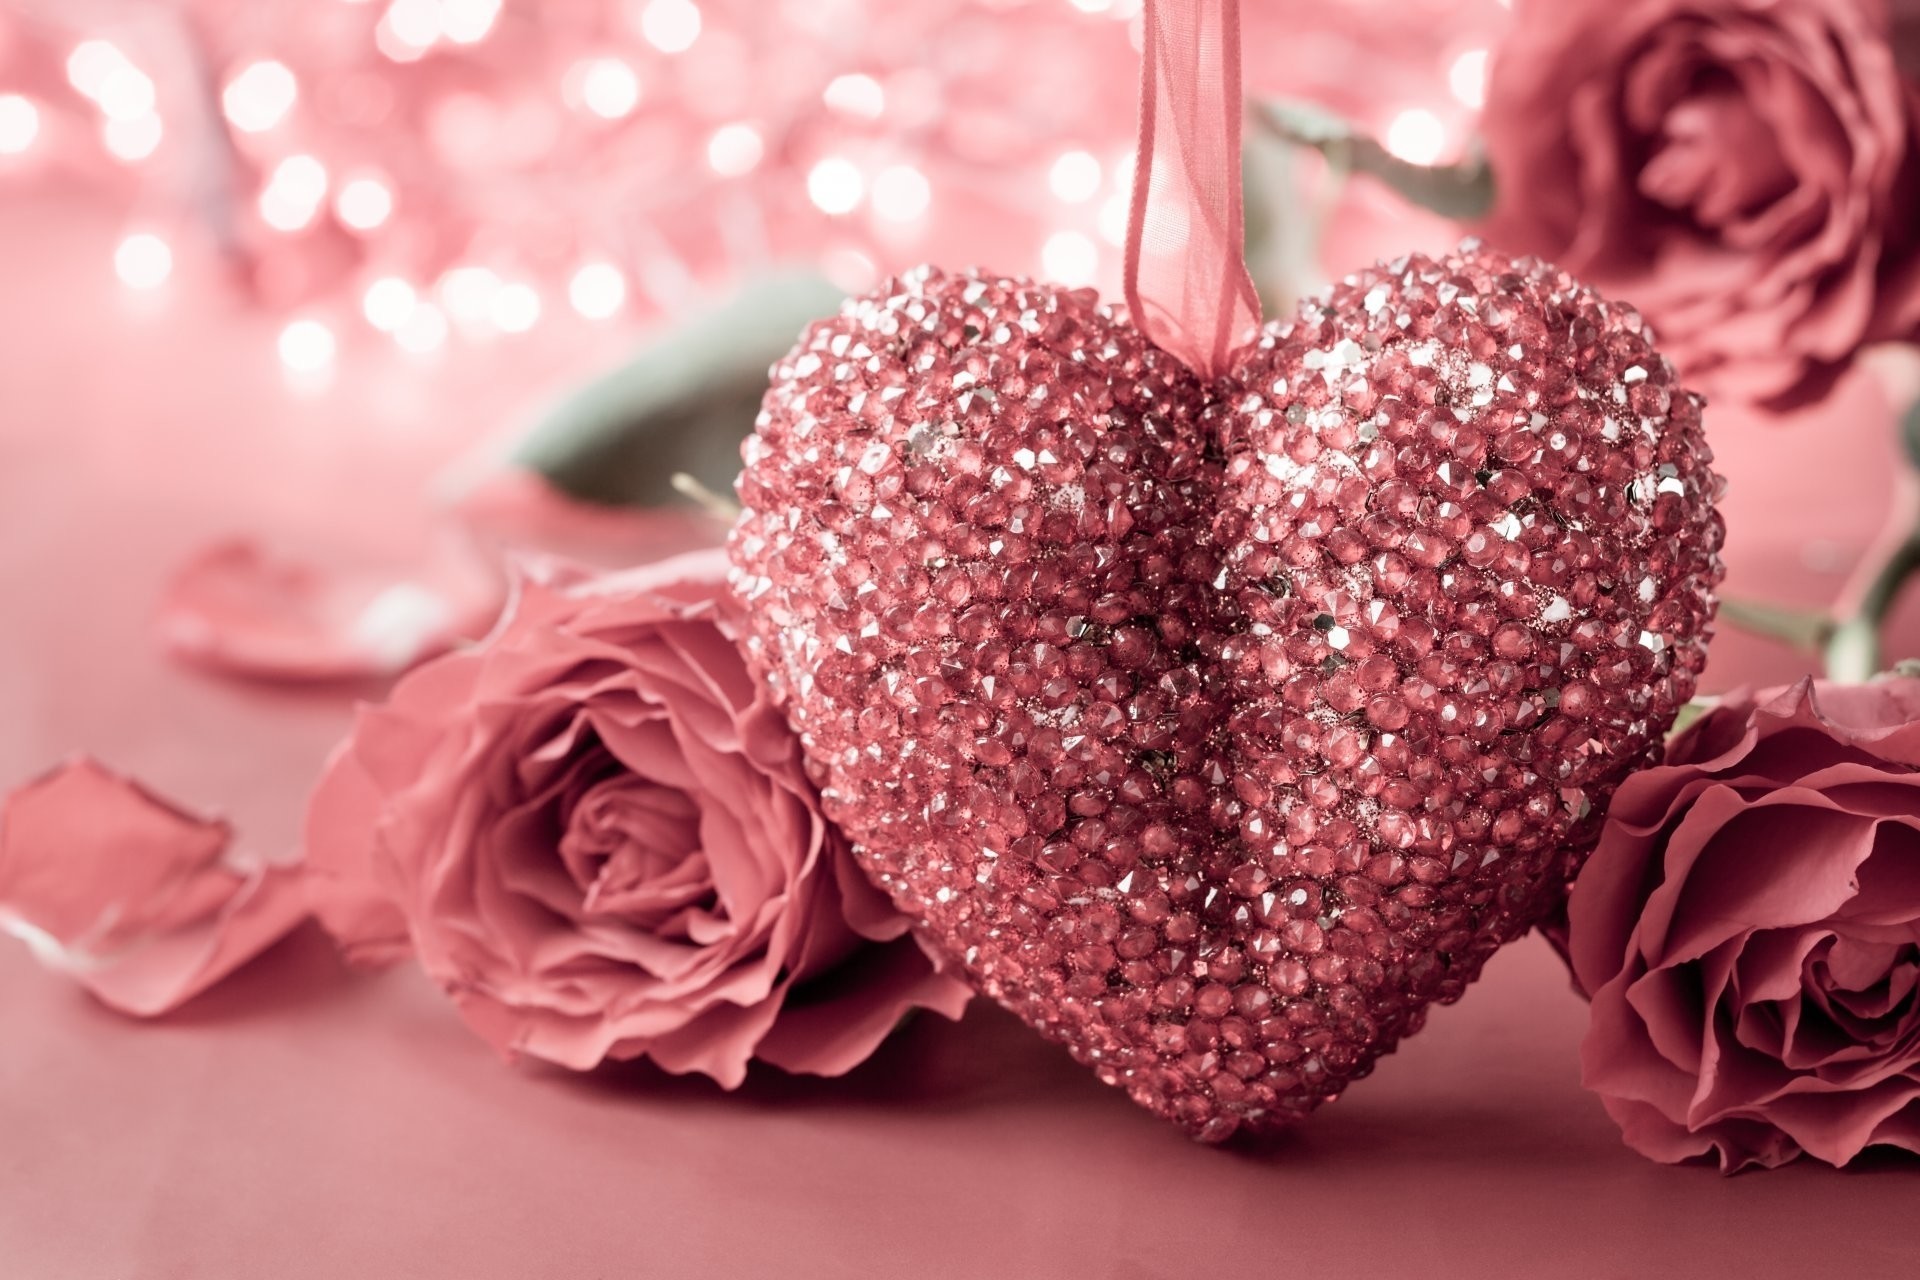 1920x1280 Love Roses And Hearts Wallpapers Valentine's Day Romantic Heart Love Rose  Pink Heart Rose Hd Wallpaper